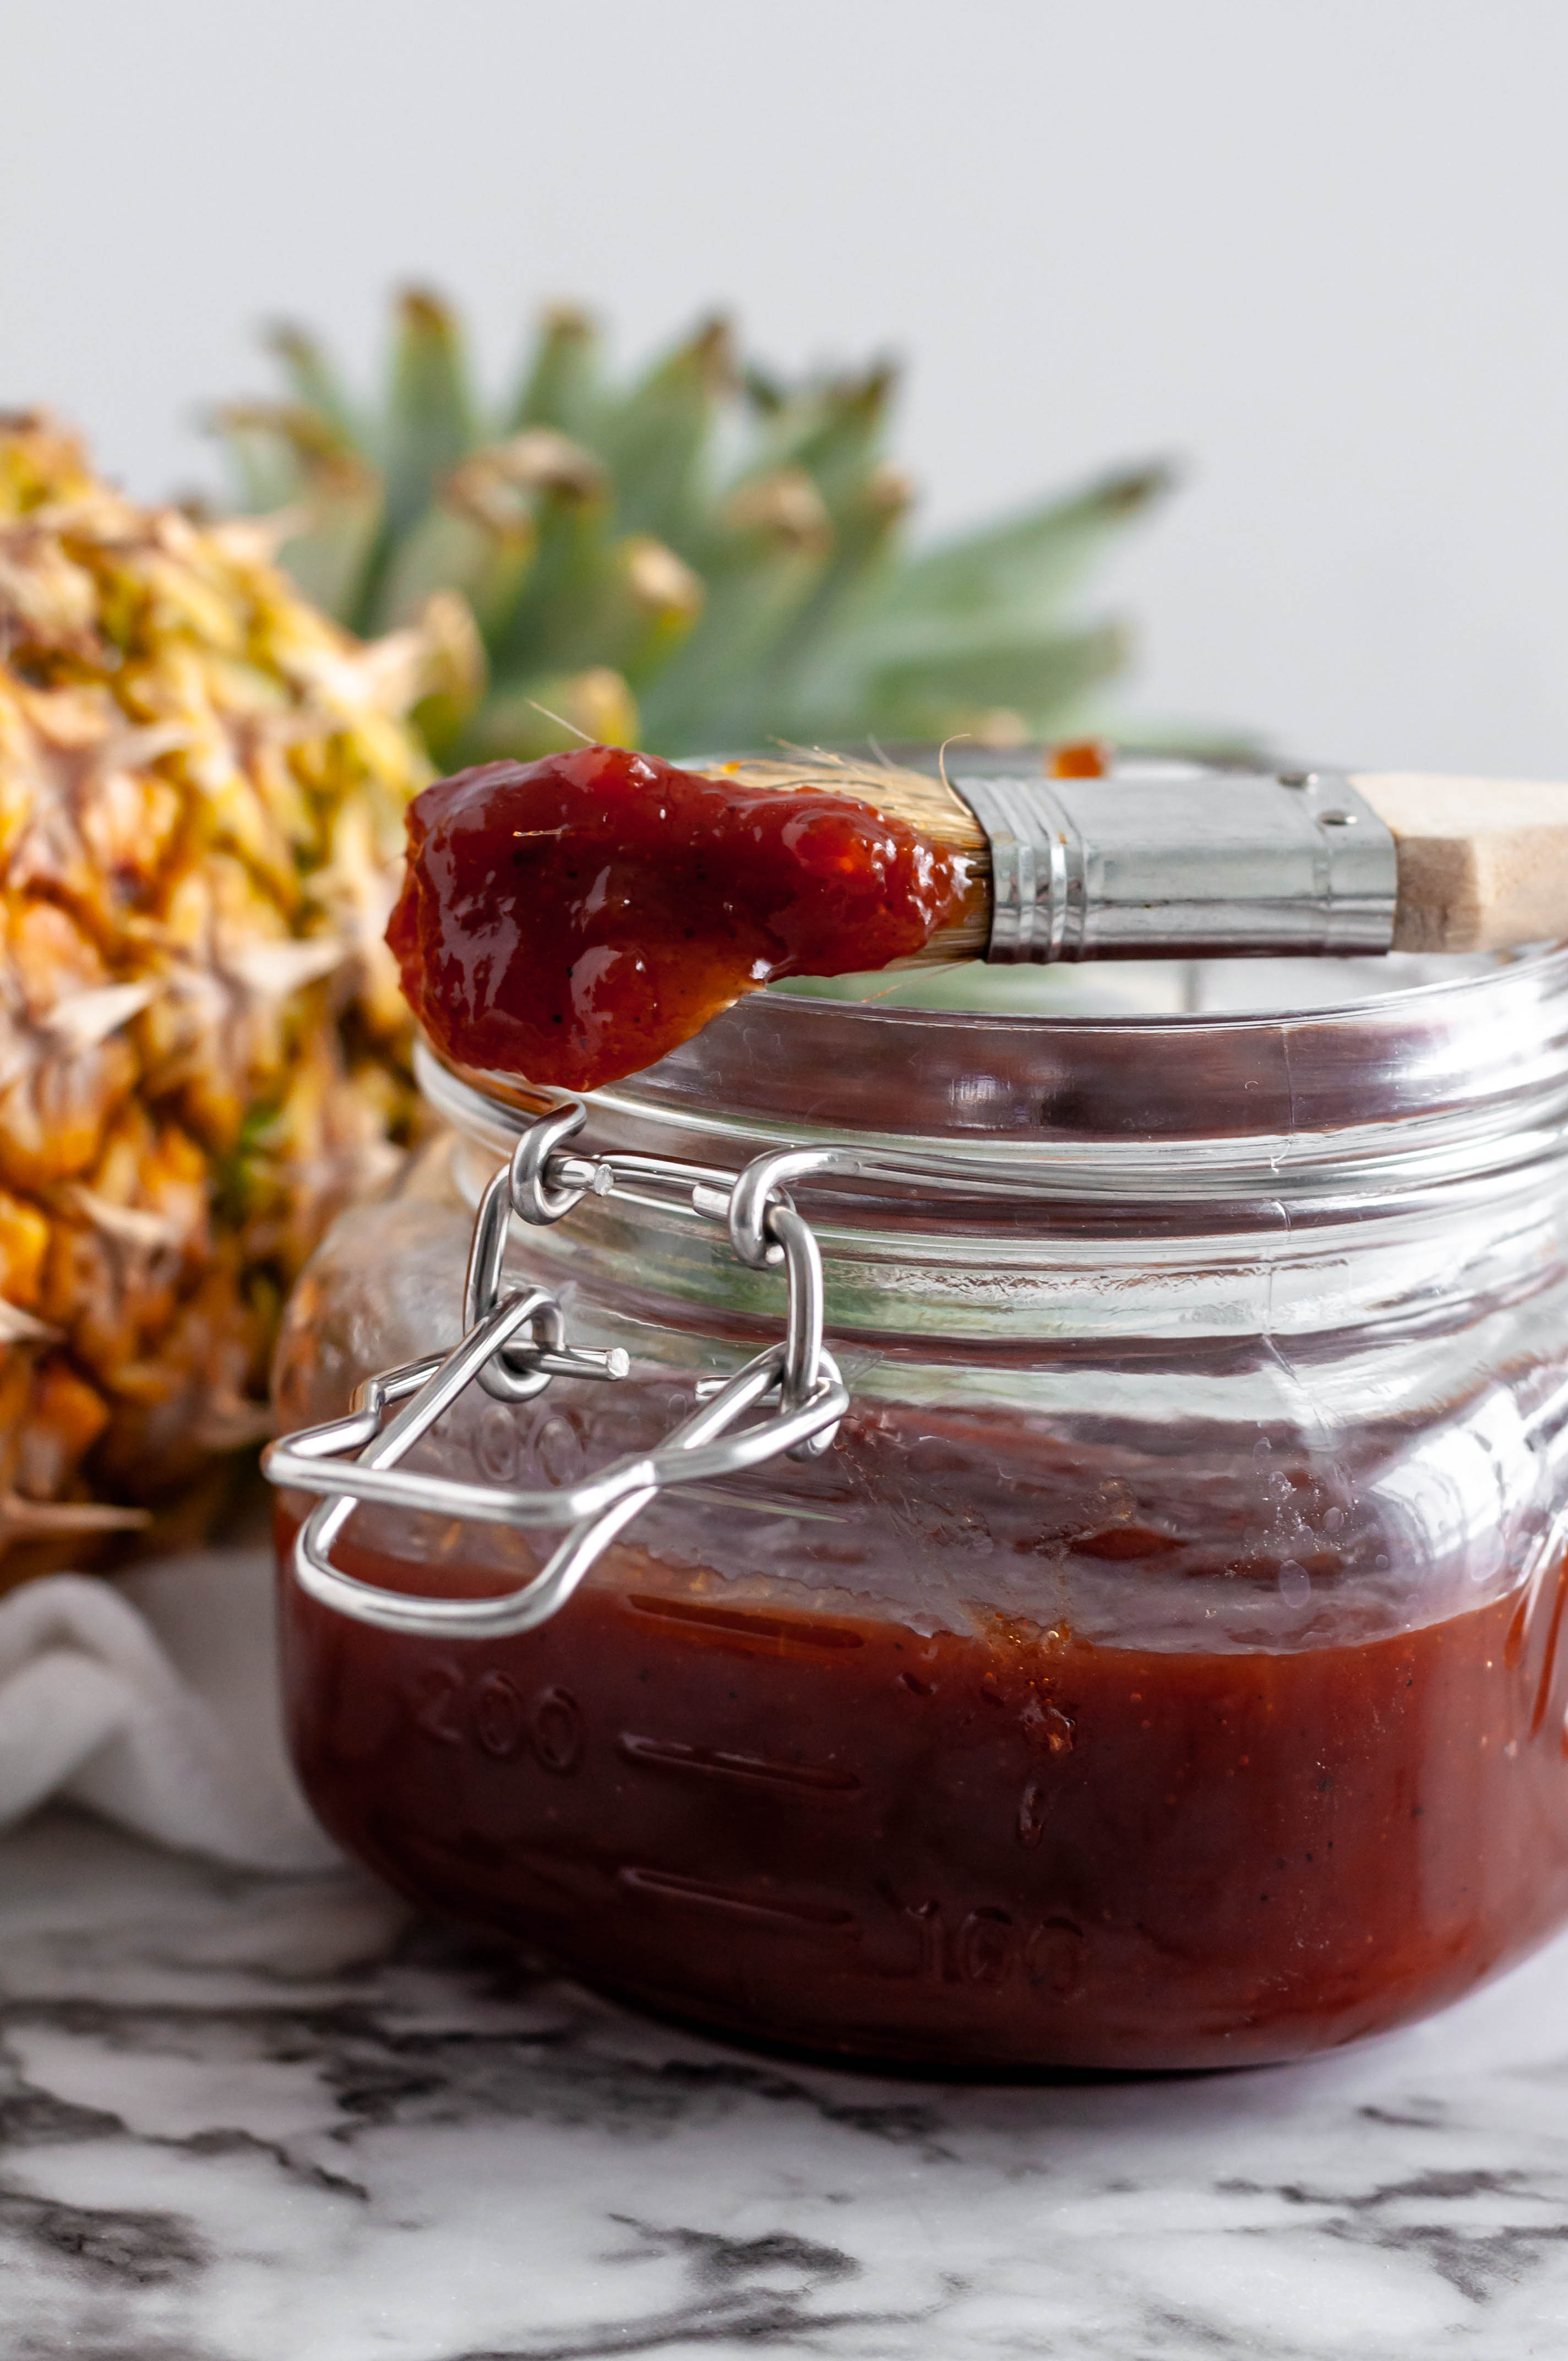 Pineapple BBQ Sauce is sweet, tangy and super simple to make. All you need is a handful of ingredients and less than 30 minutes for a thick, sweet sauce.